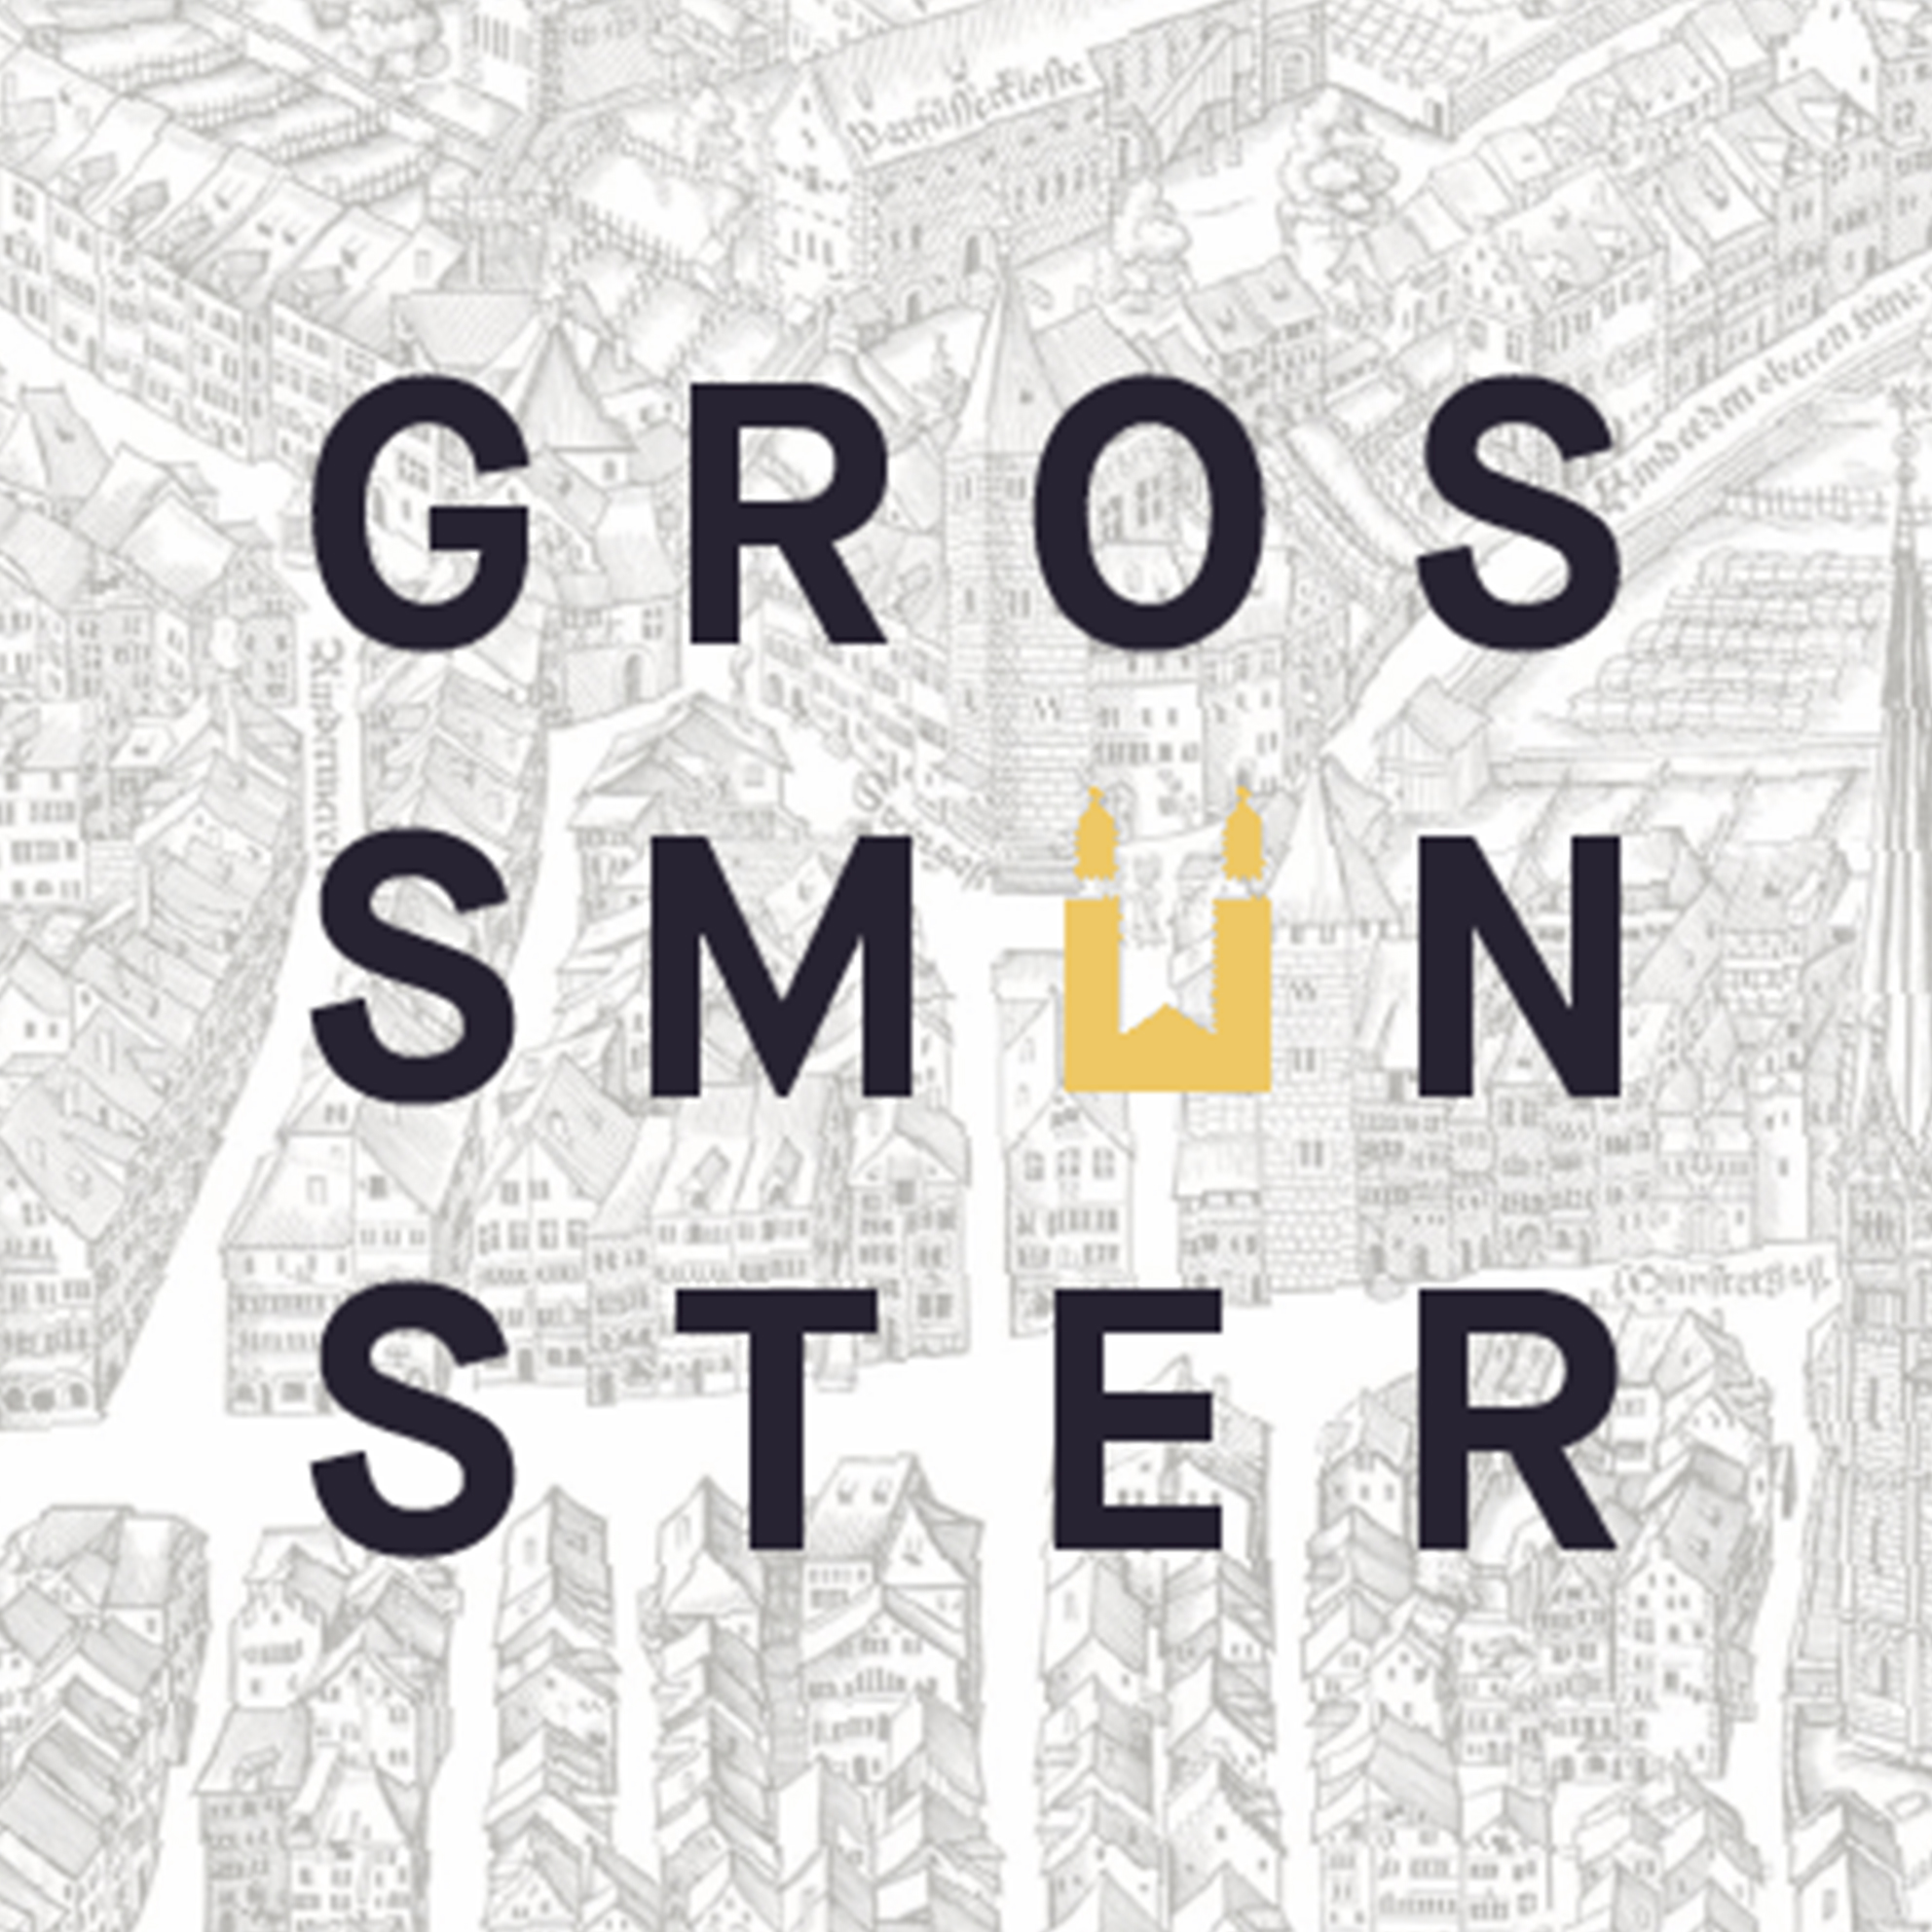 A Change in Strategy for Grossmünster Church